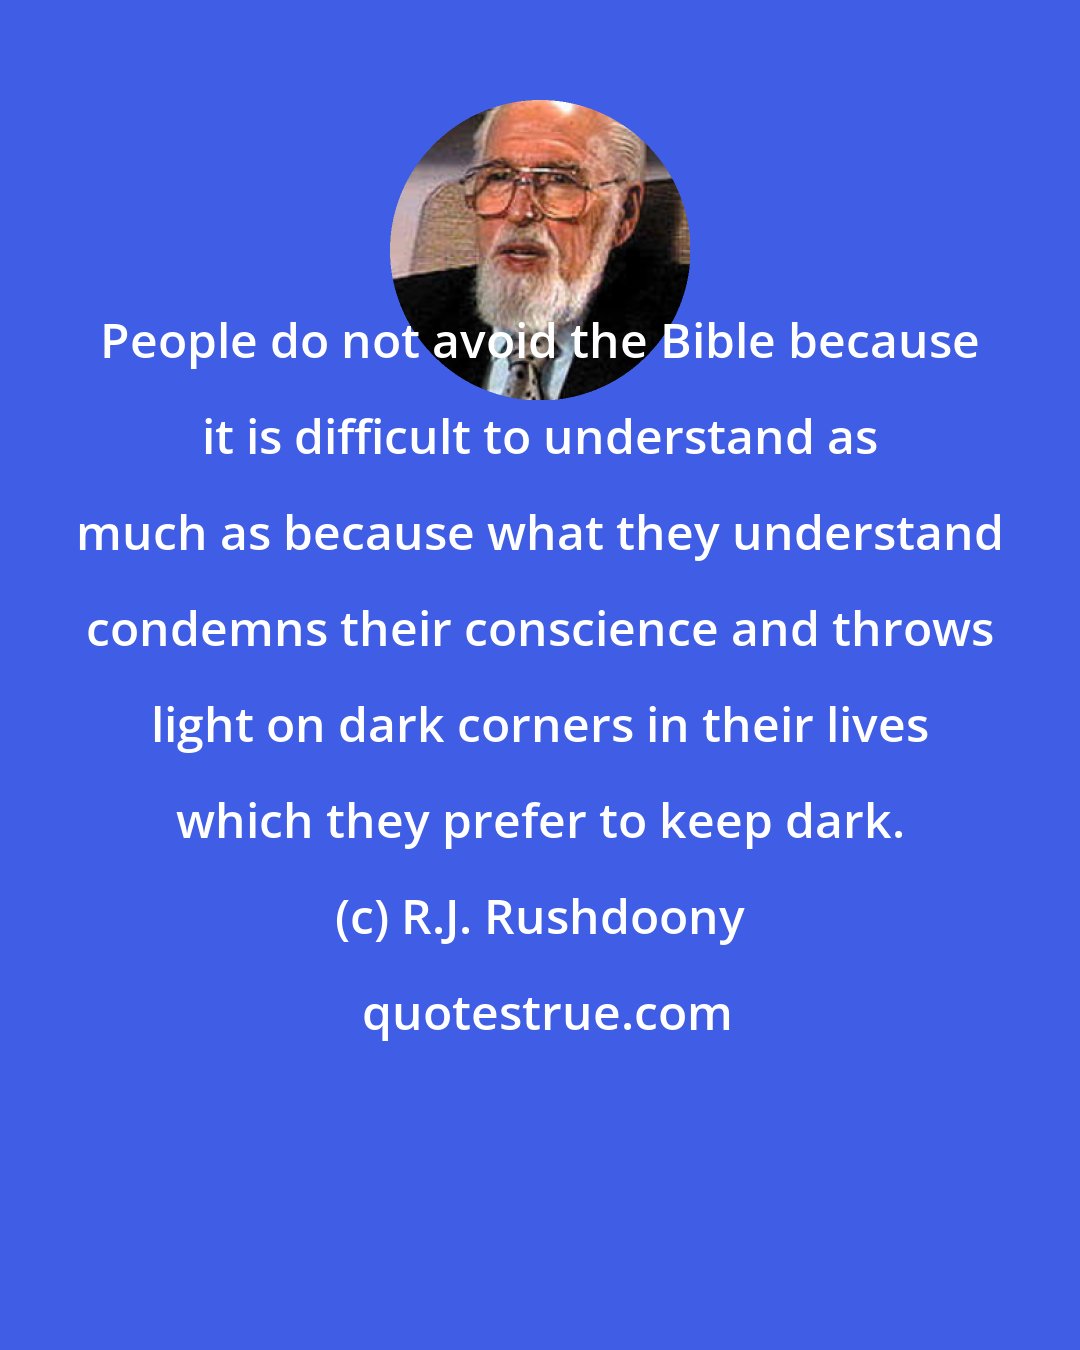 R.J. Rushdoony: People do not avoid the Bible because it is difficult to understand as much as because what they understand condemns their conscience and throws light on dark corners in their lives which they prefer to keep dark.